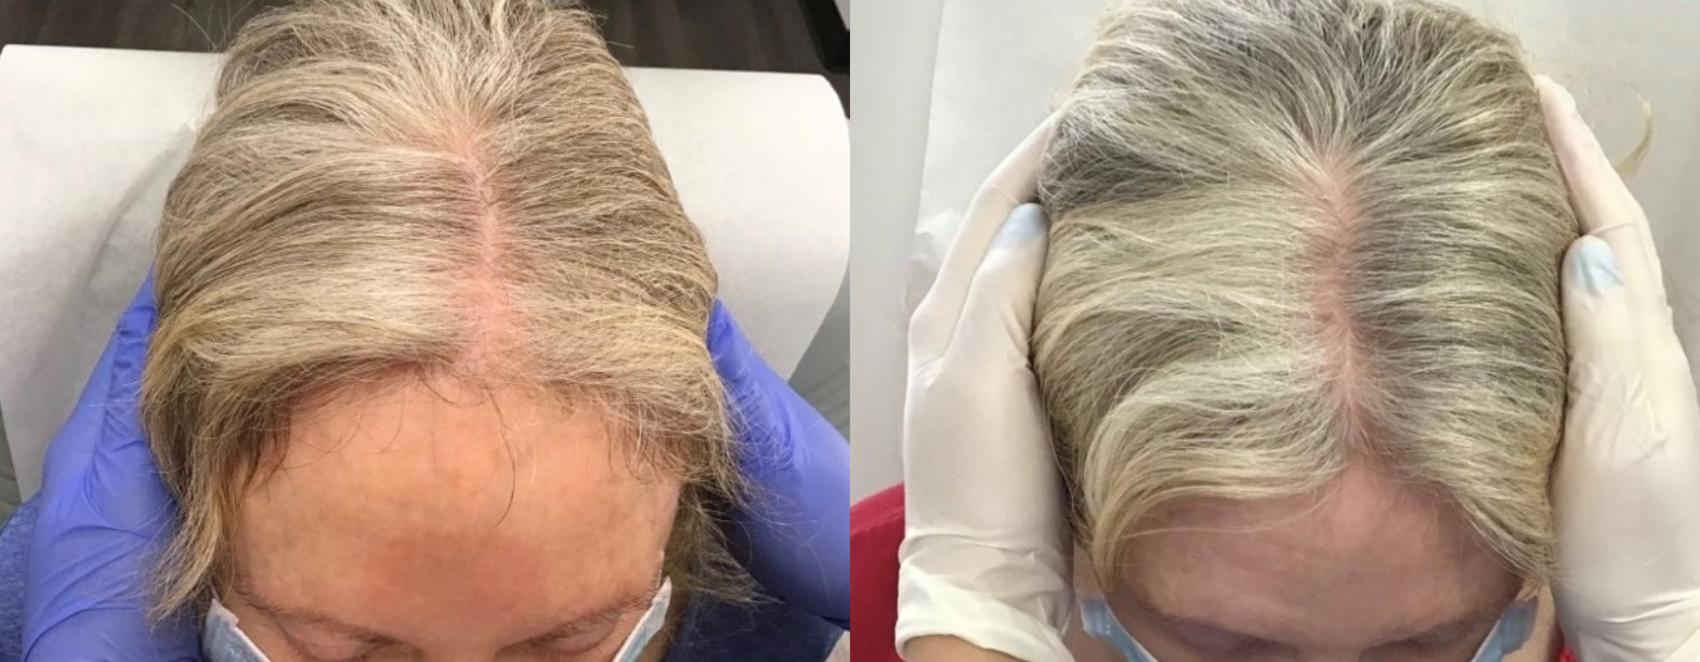 Hair Restoration Case 44 Before & After Top of Head | Houston, TX | DermSurgery Associates